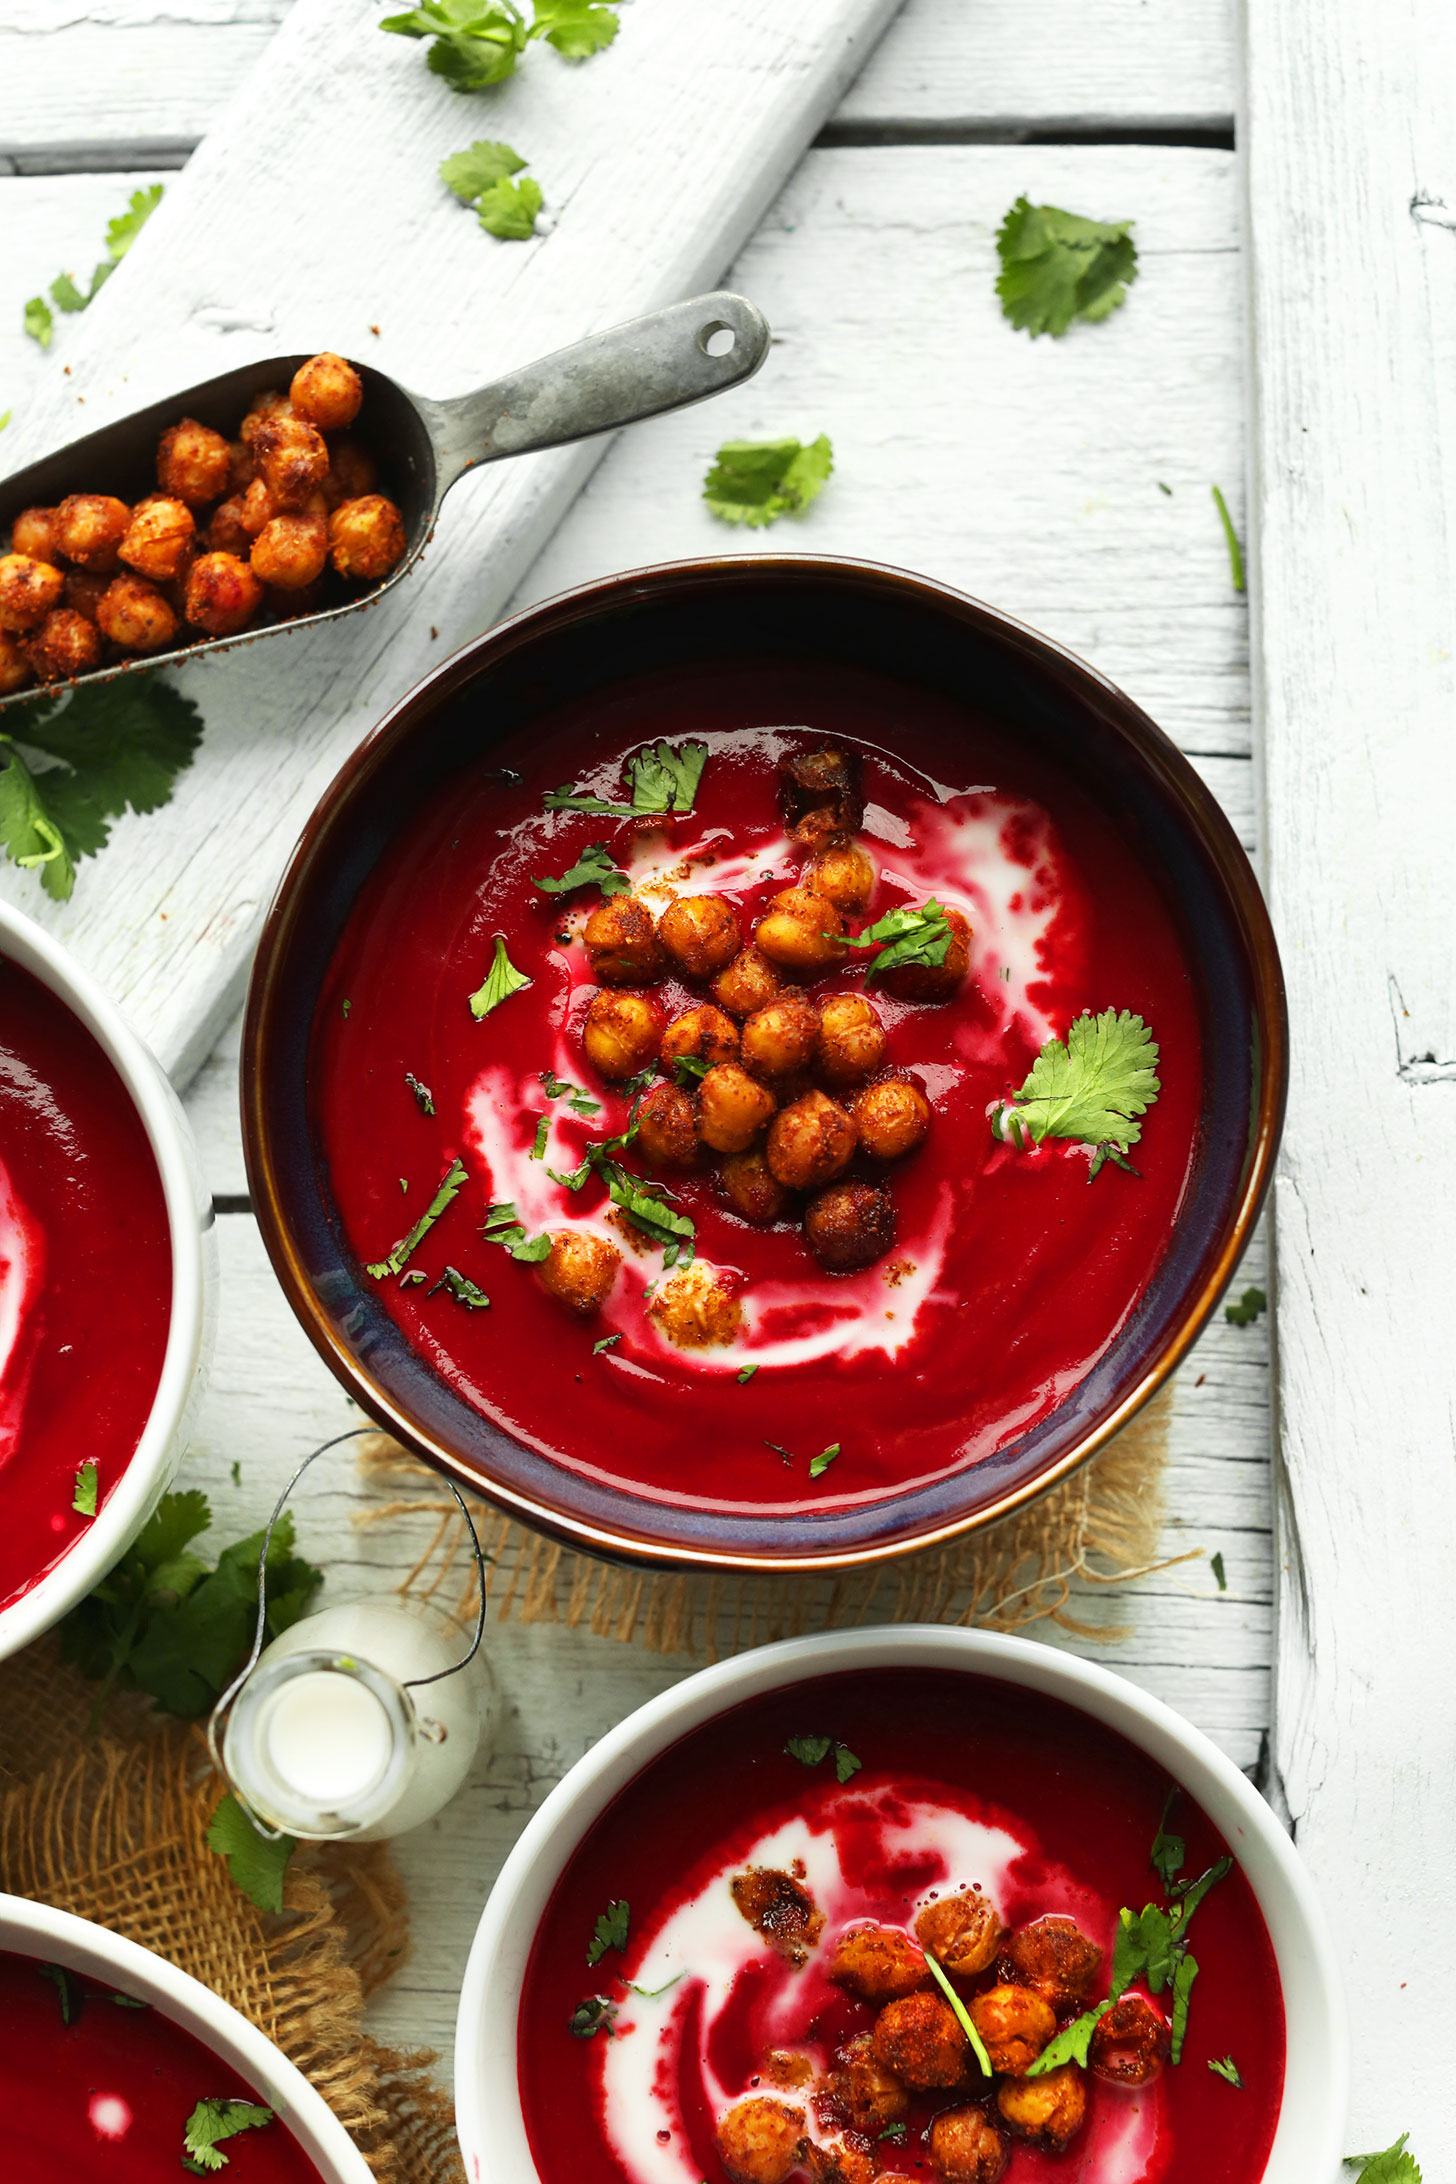 Bowls of our recipe for Curried Beet Soup with Tandoori Chickpeas and Coconut Milk